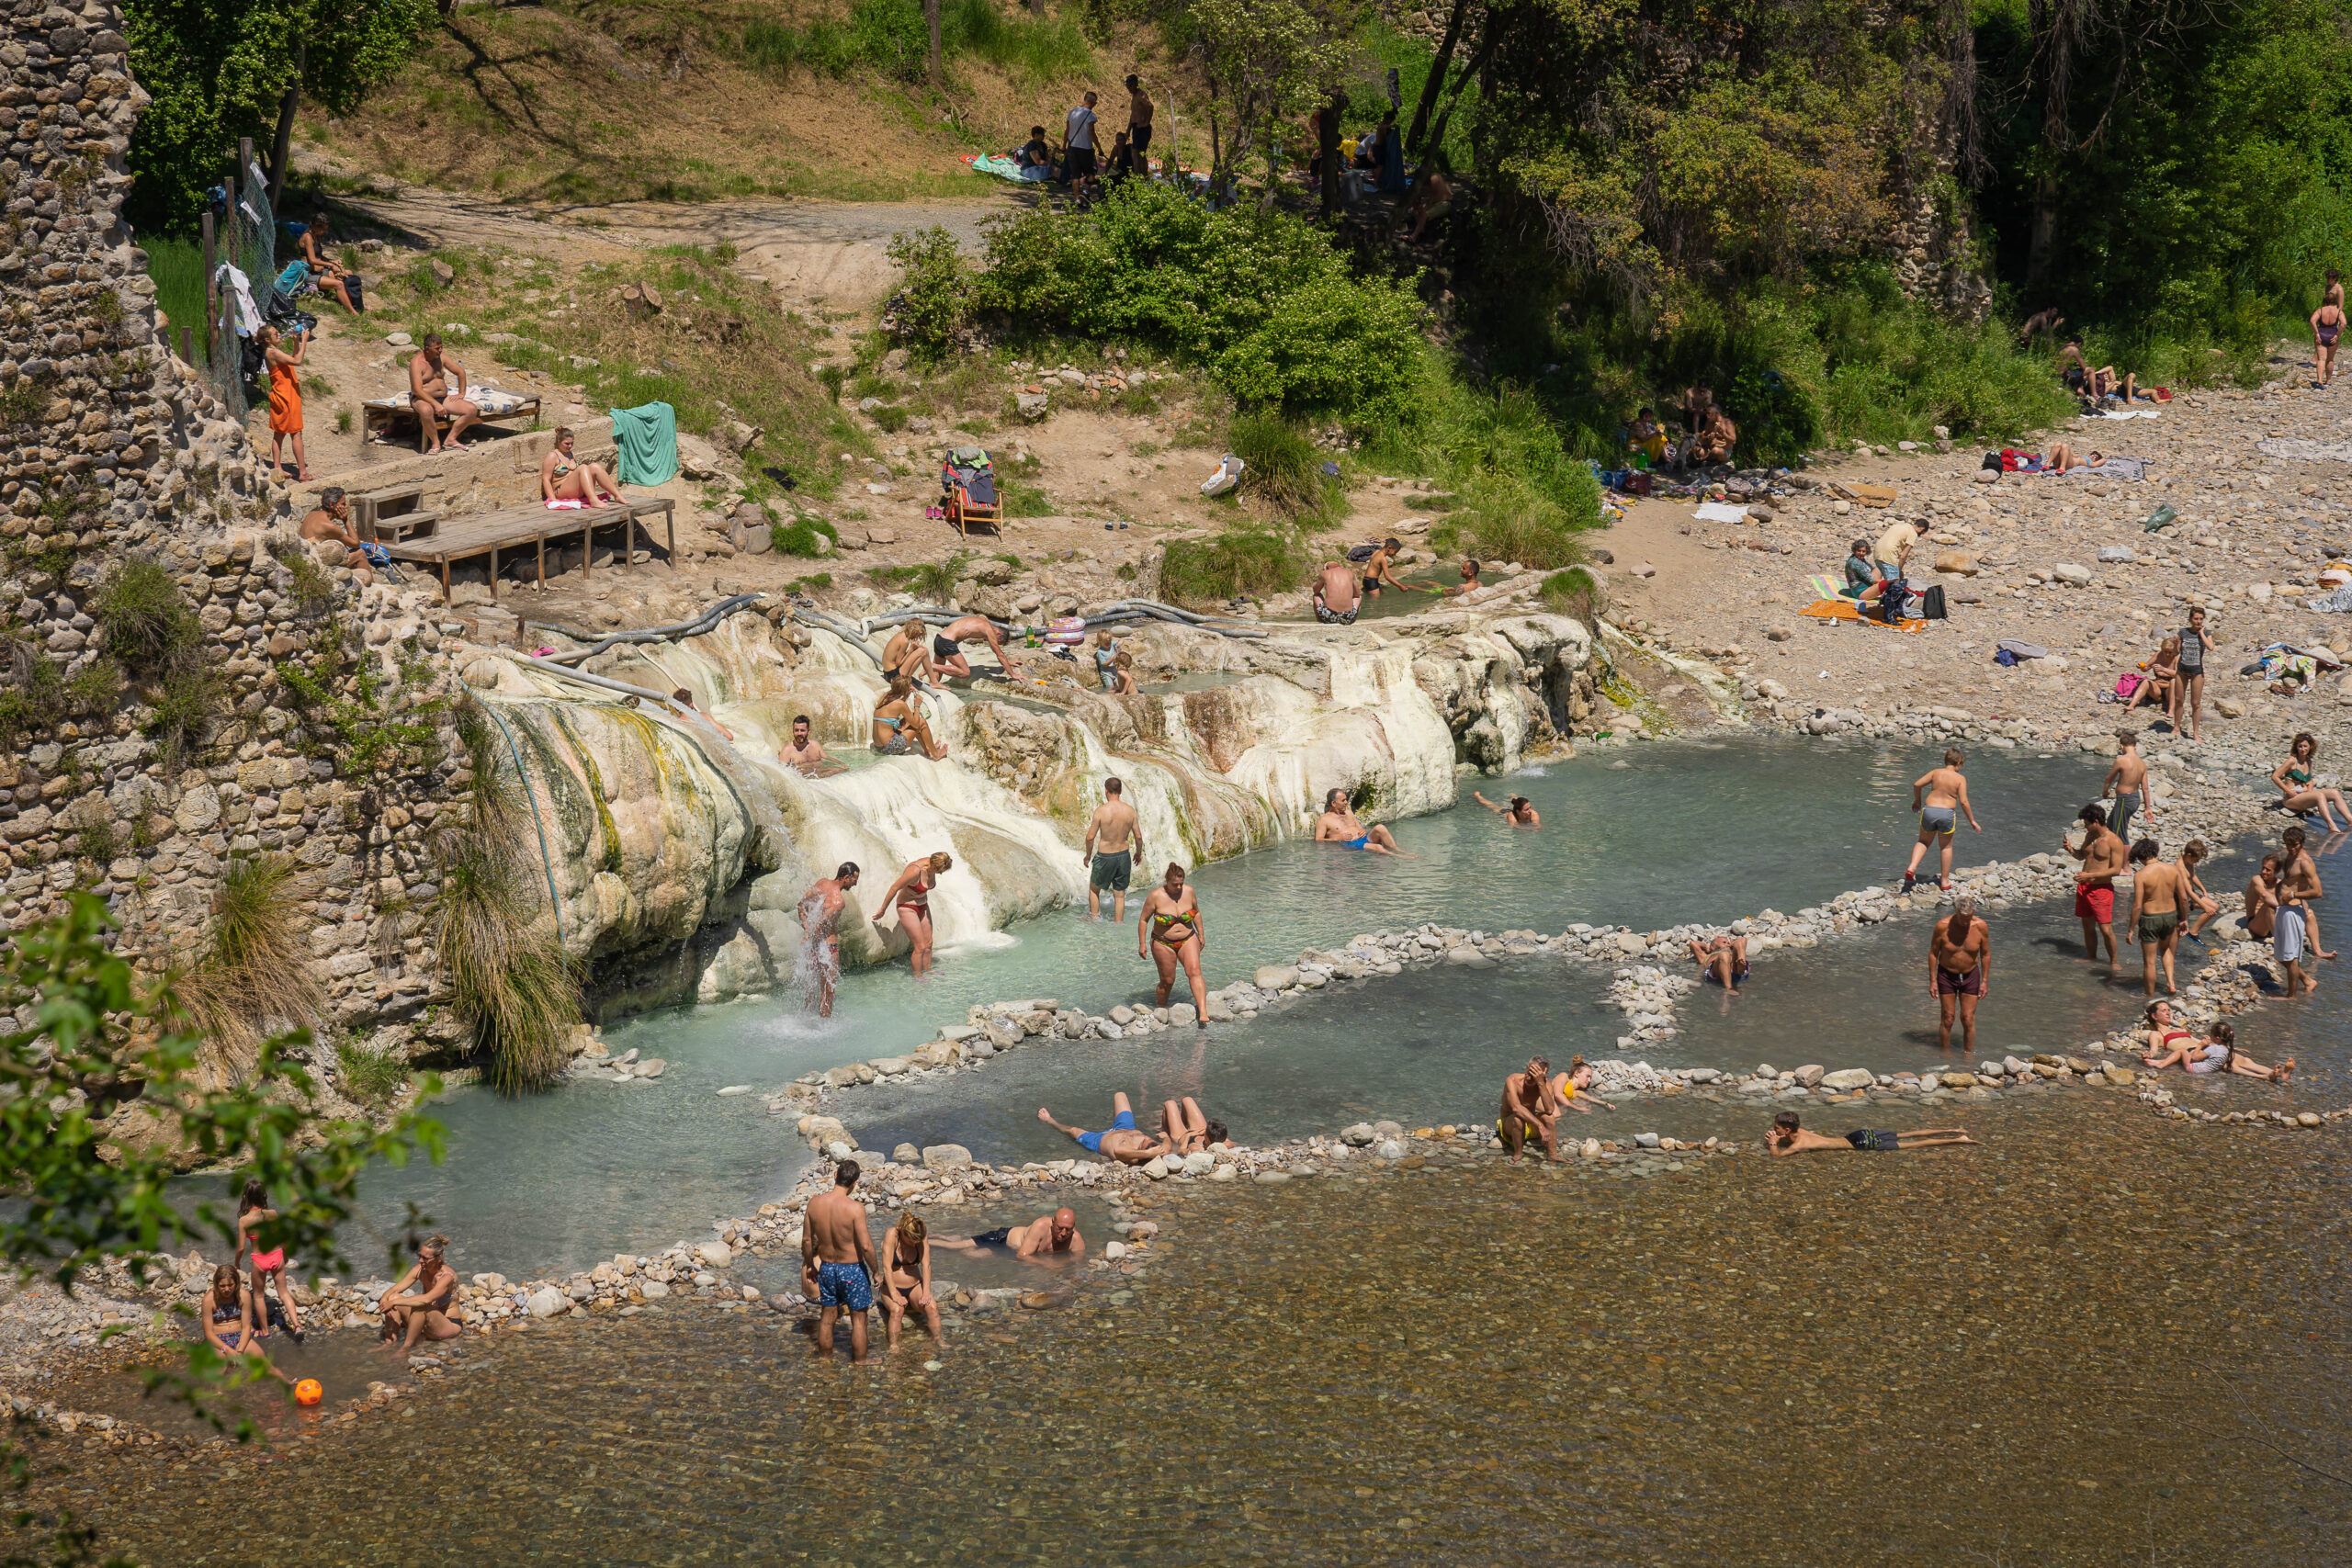 View of a crowd enjoying the Petriolo Hot Springs in Tuscany There are several pools a rocky beach and a bench visible. 